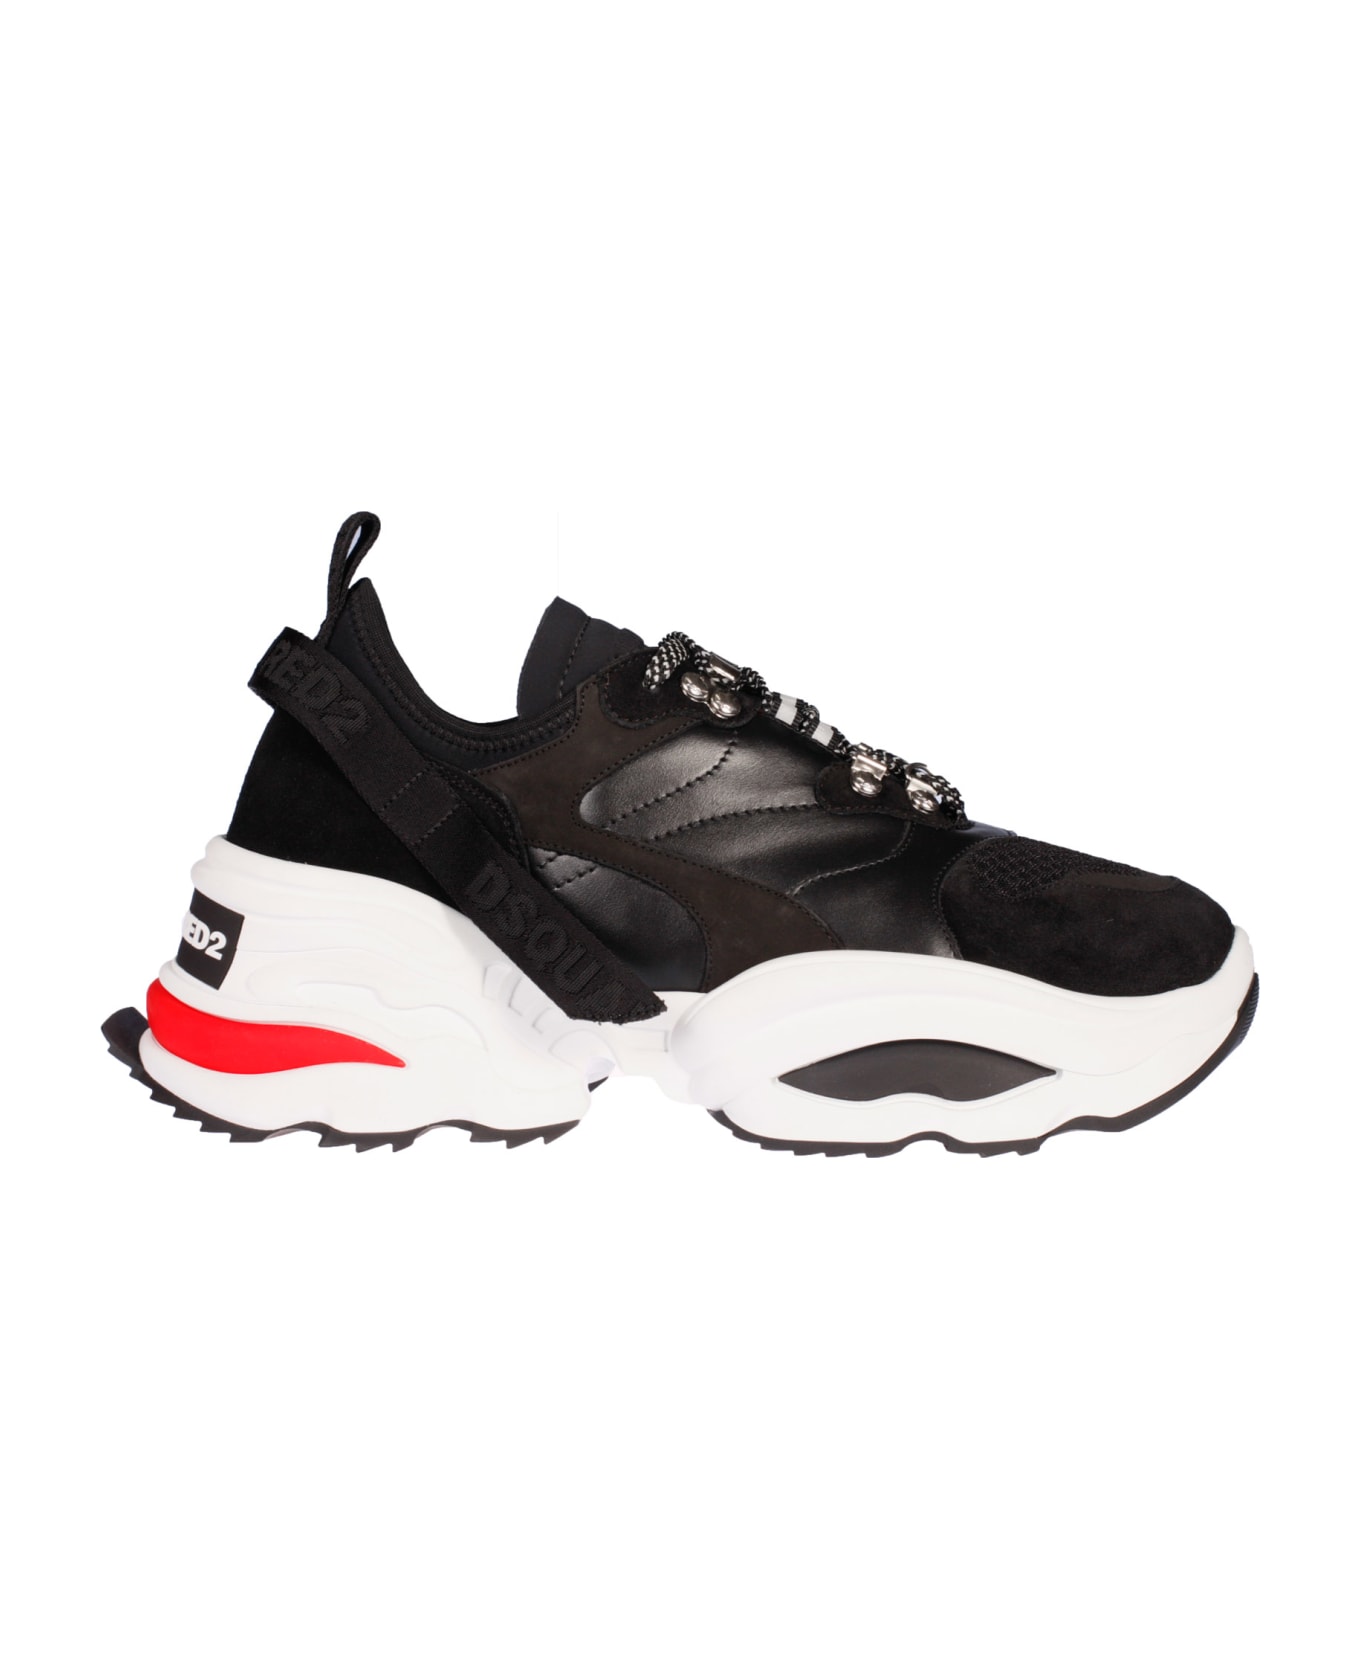 Dsquared2 The Giant K2 Sneakers | italist